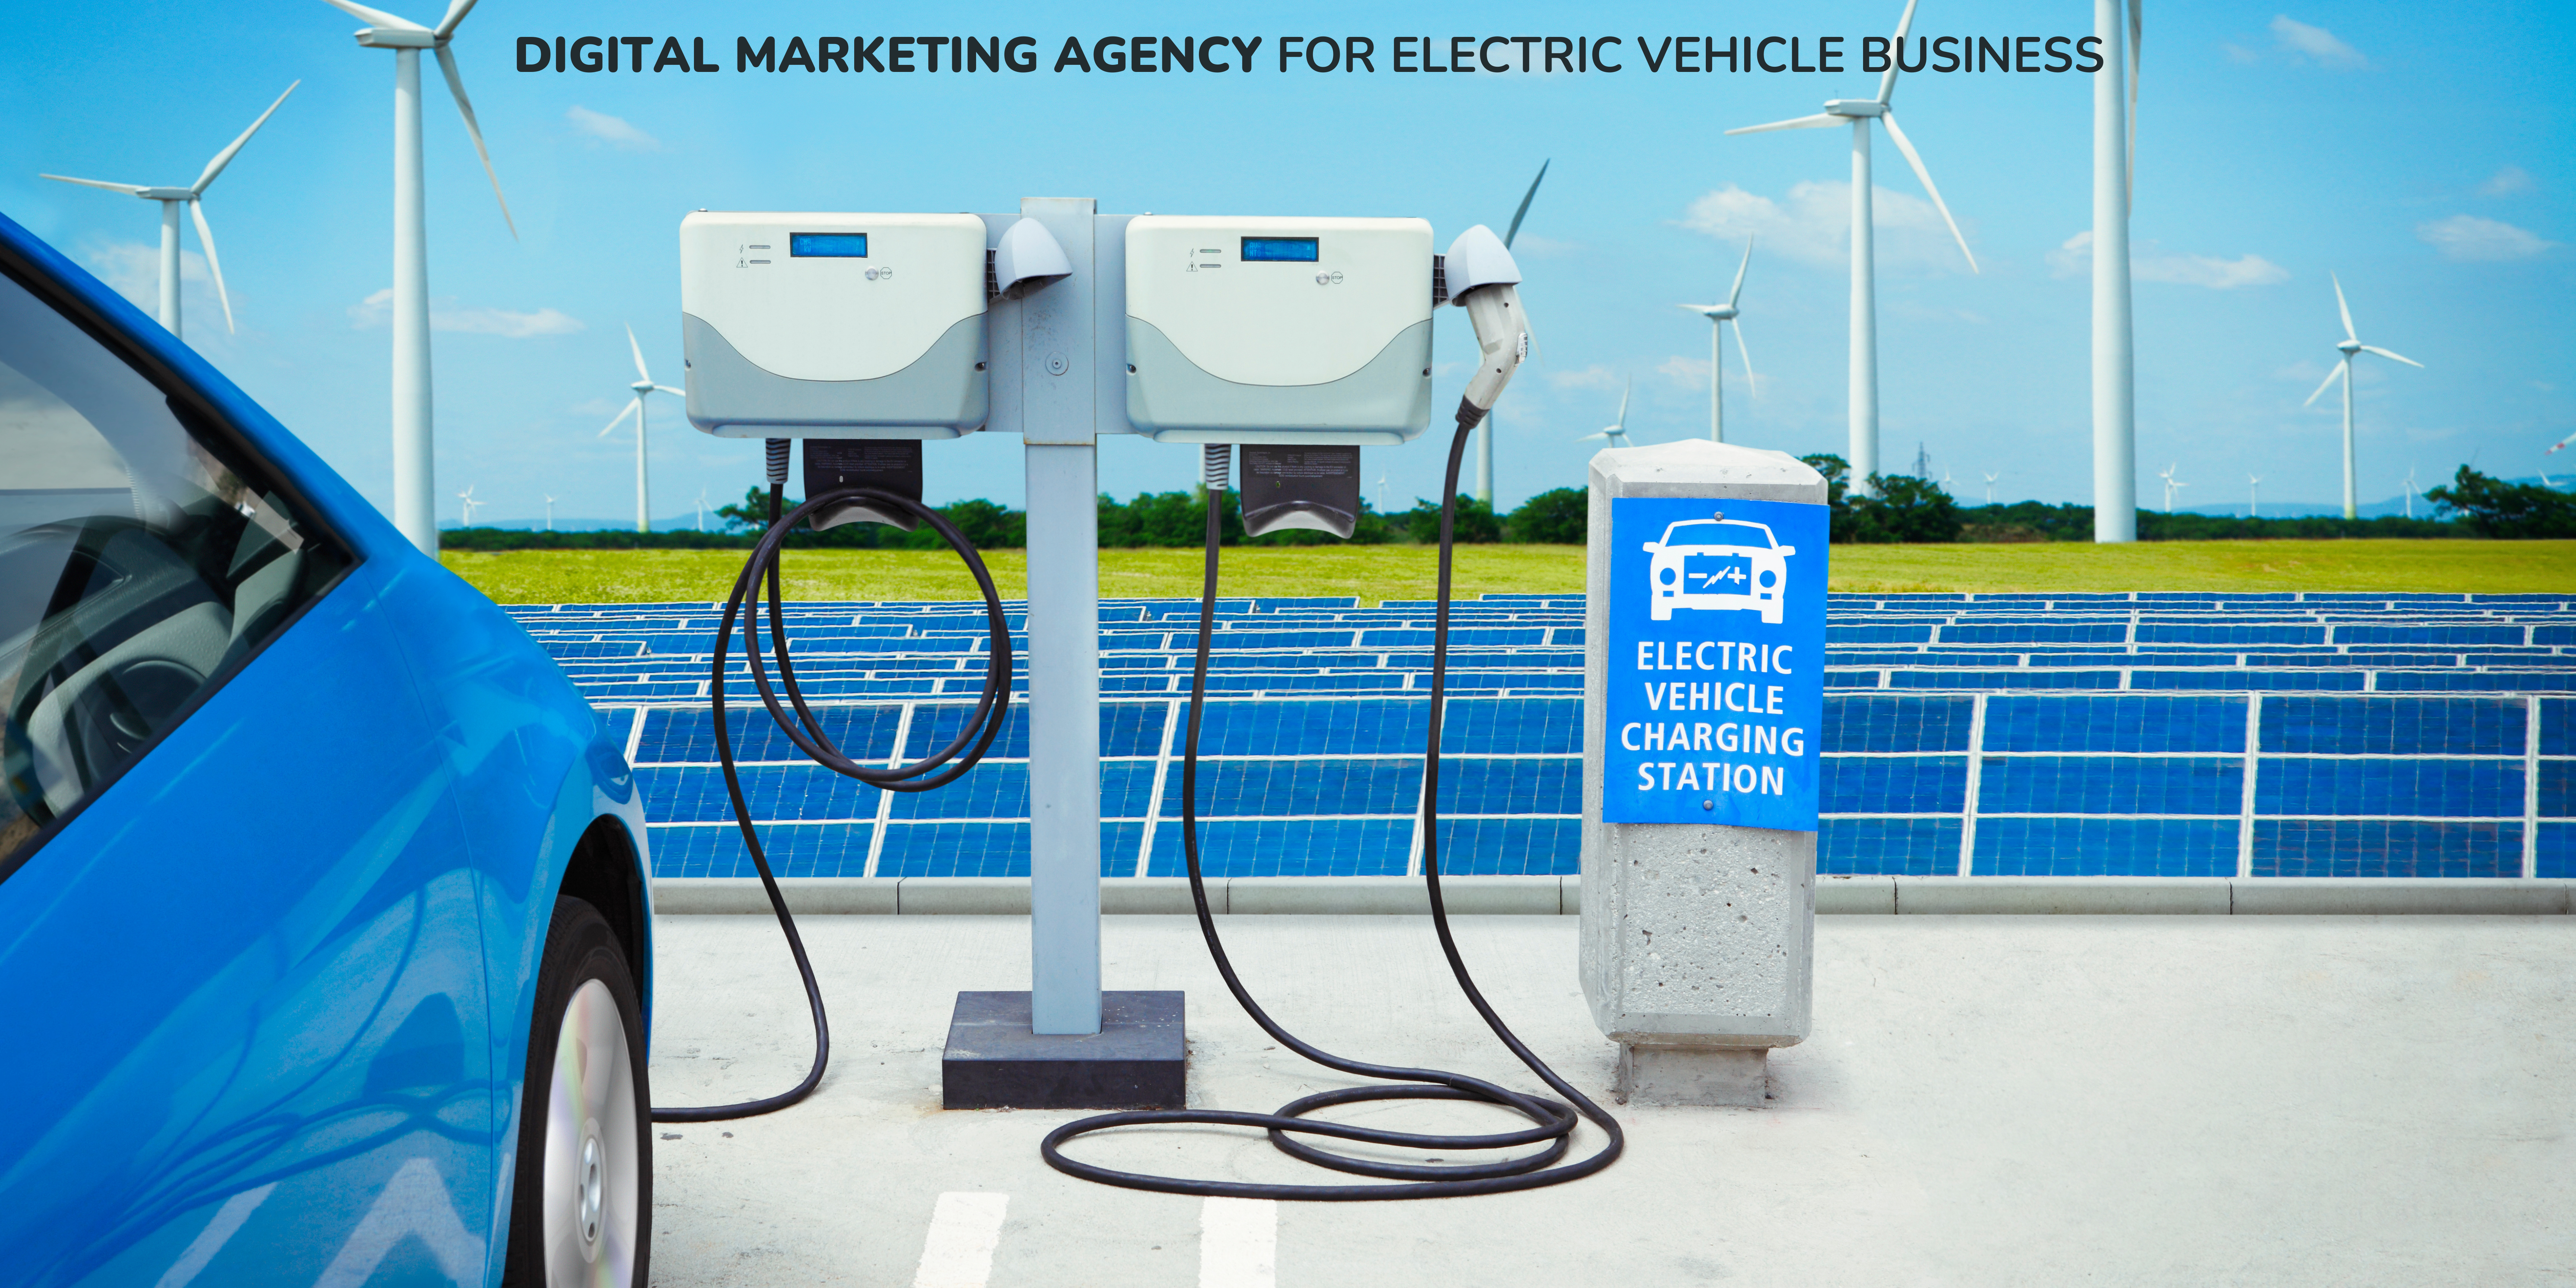 DIGITAL MARKETING AGENCY FOR ELECTRIC VEHICLE BUSINESS